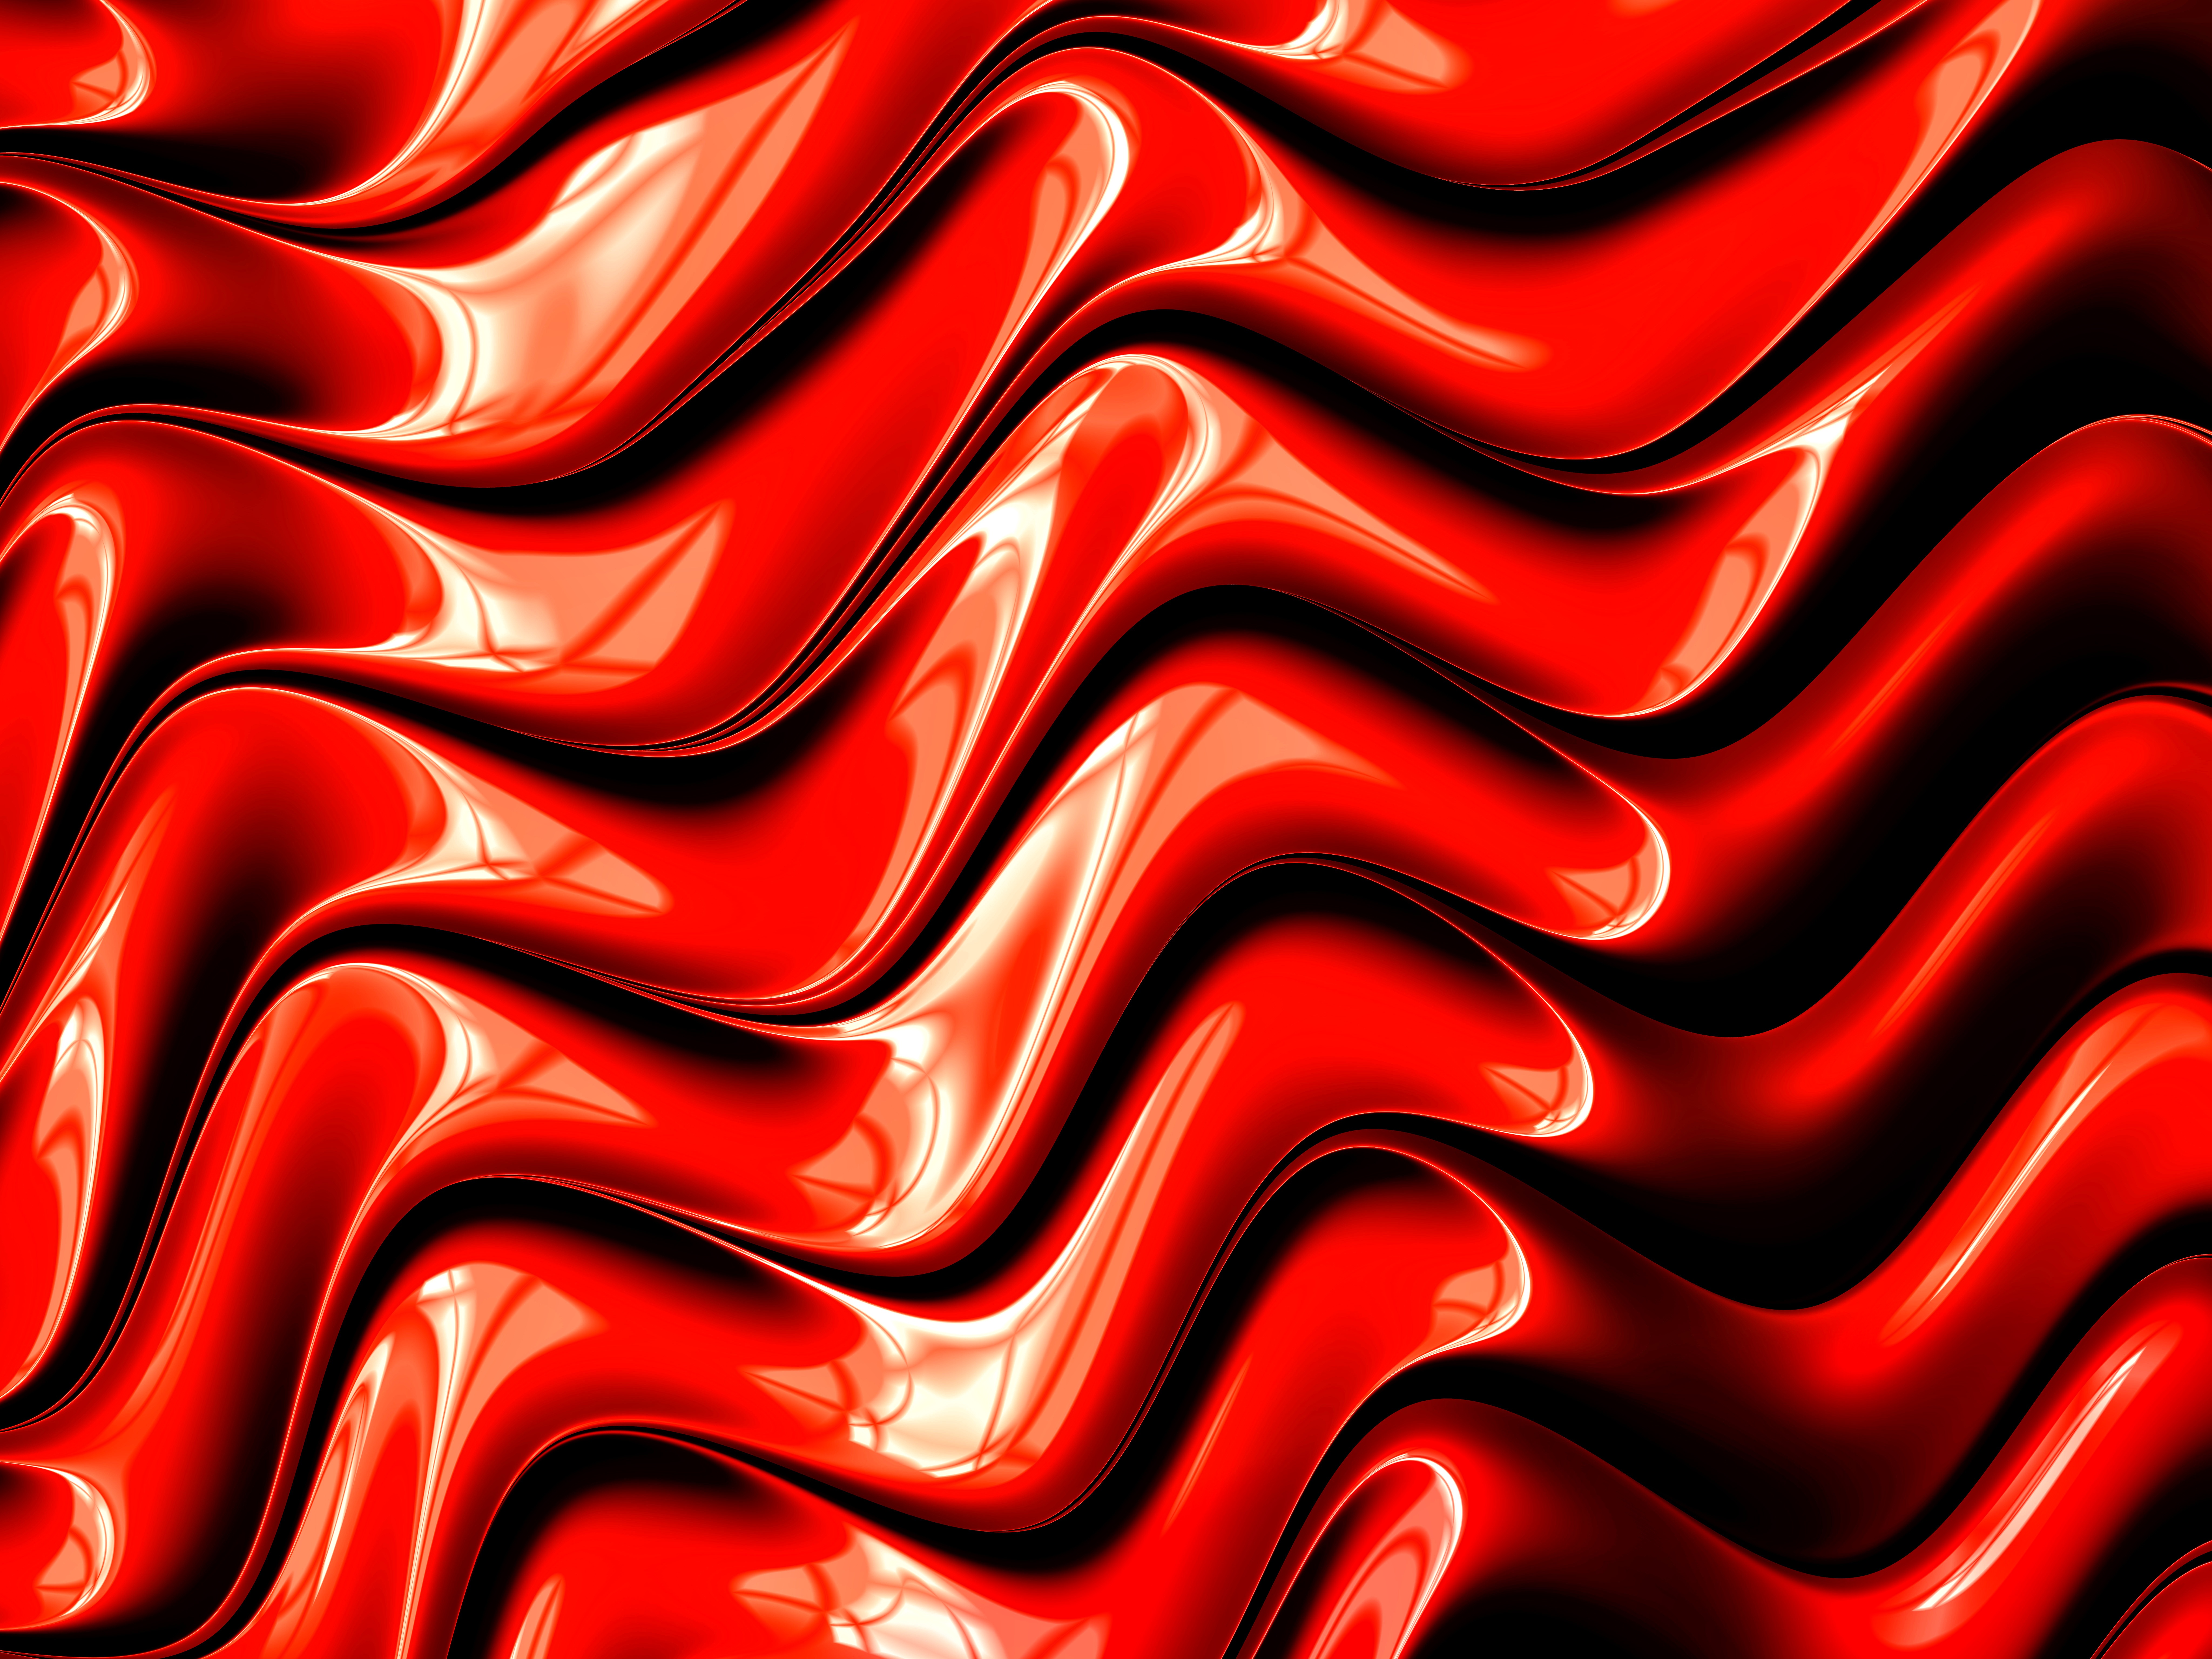 graphics, 3d, surface, red, fractal